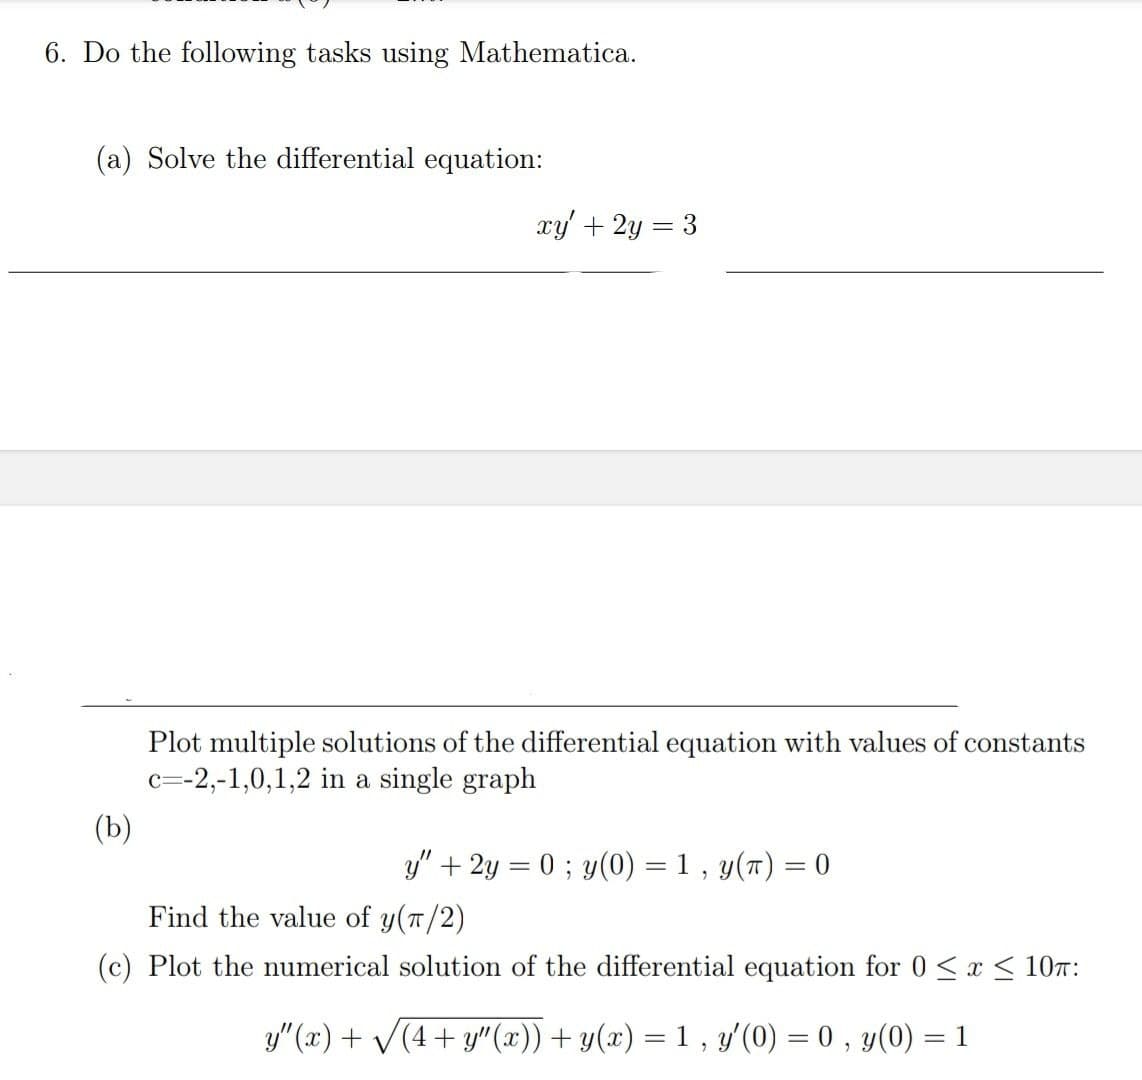 6. Do the following tasks using Mathematica.
(a) Solve the differential equation:
xy' +2y = 3
Plot multiple solutions of the differential equation with values of constants
c=-2,-1,0,1,2 in a single graph
(b)
y" + 2y = 0 ; y(0) = 1 , y(7) = 0
%3D
Find the value of y(T/2)
(c) Plot the numerical solution of the differential equation for 0<x < 107:
y"(x) + V(4+ y"(x)) + y(x) = 1 , y'(0) = 0 , y(0) = 1
%3D
%3D
